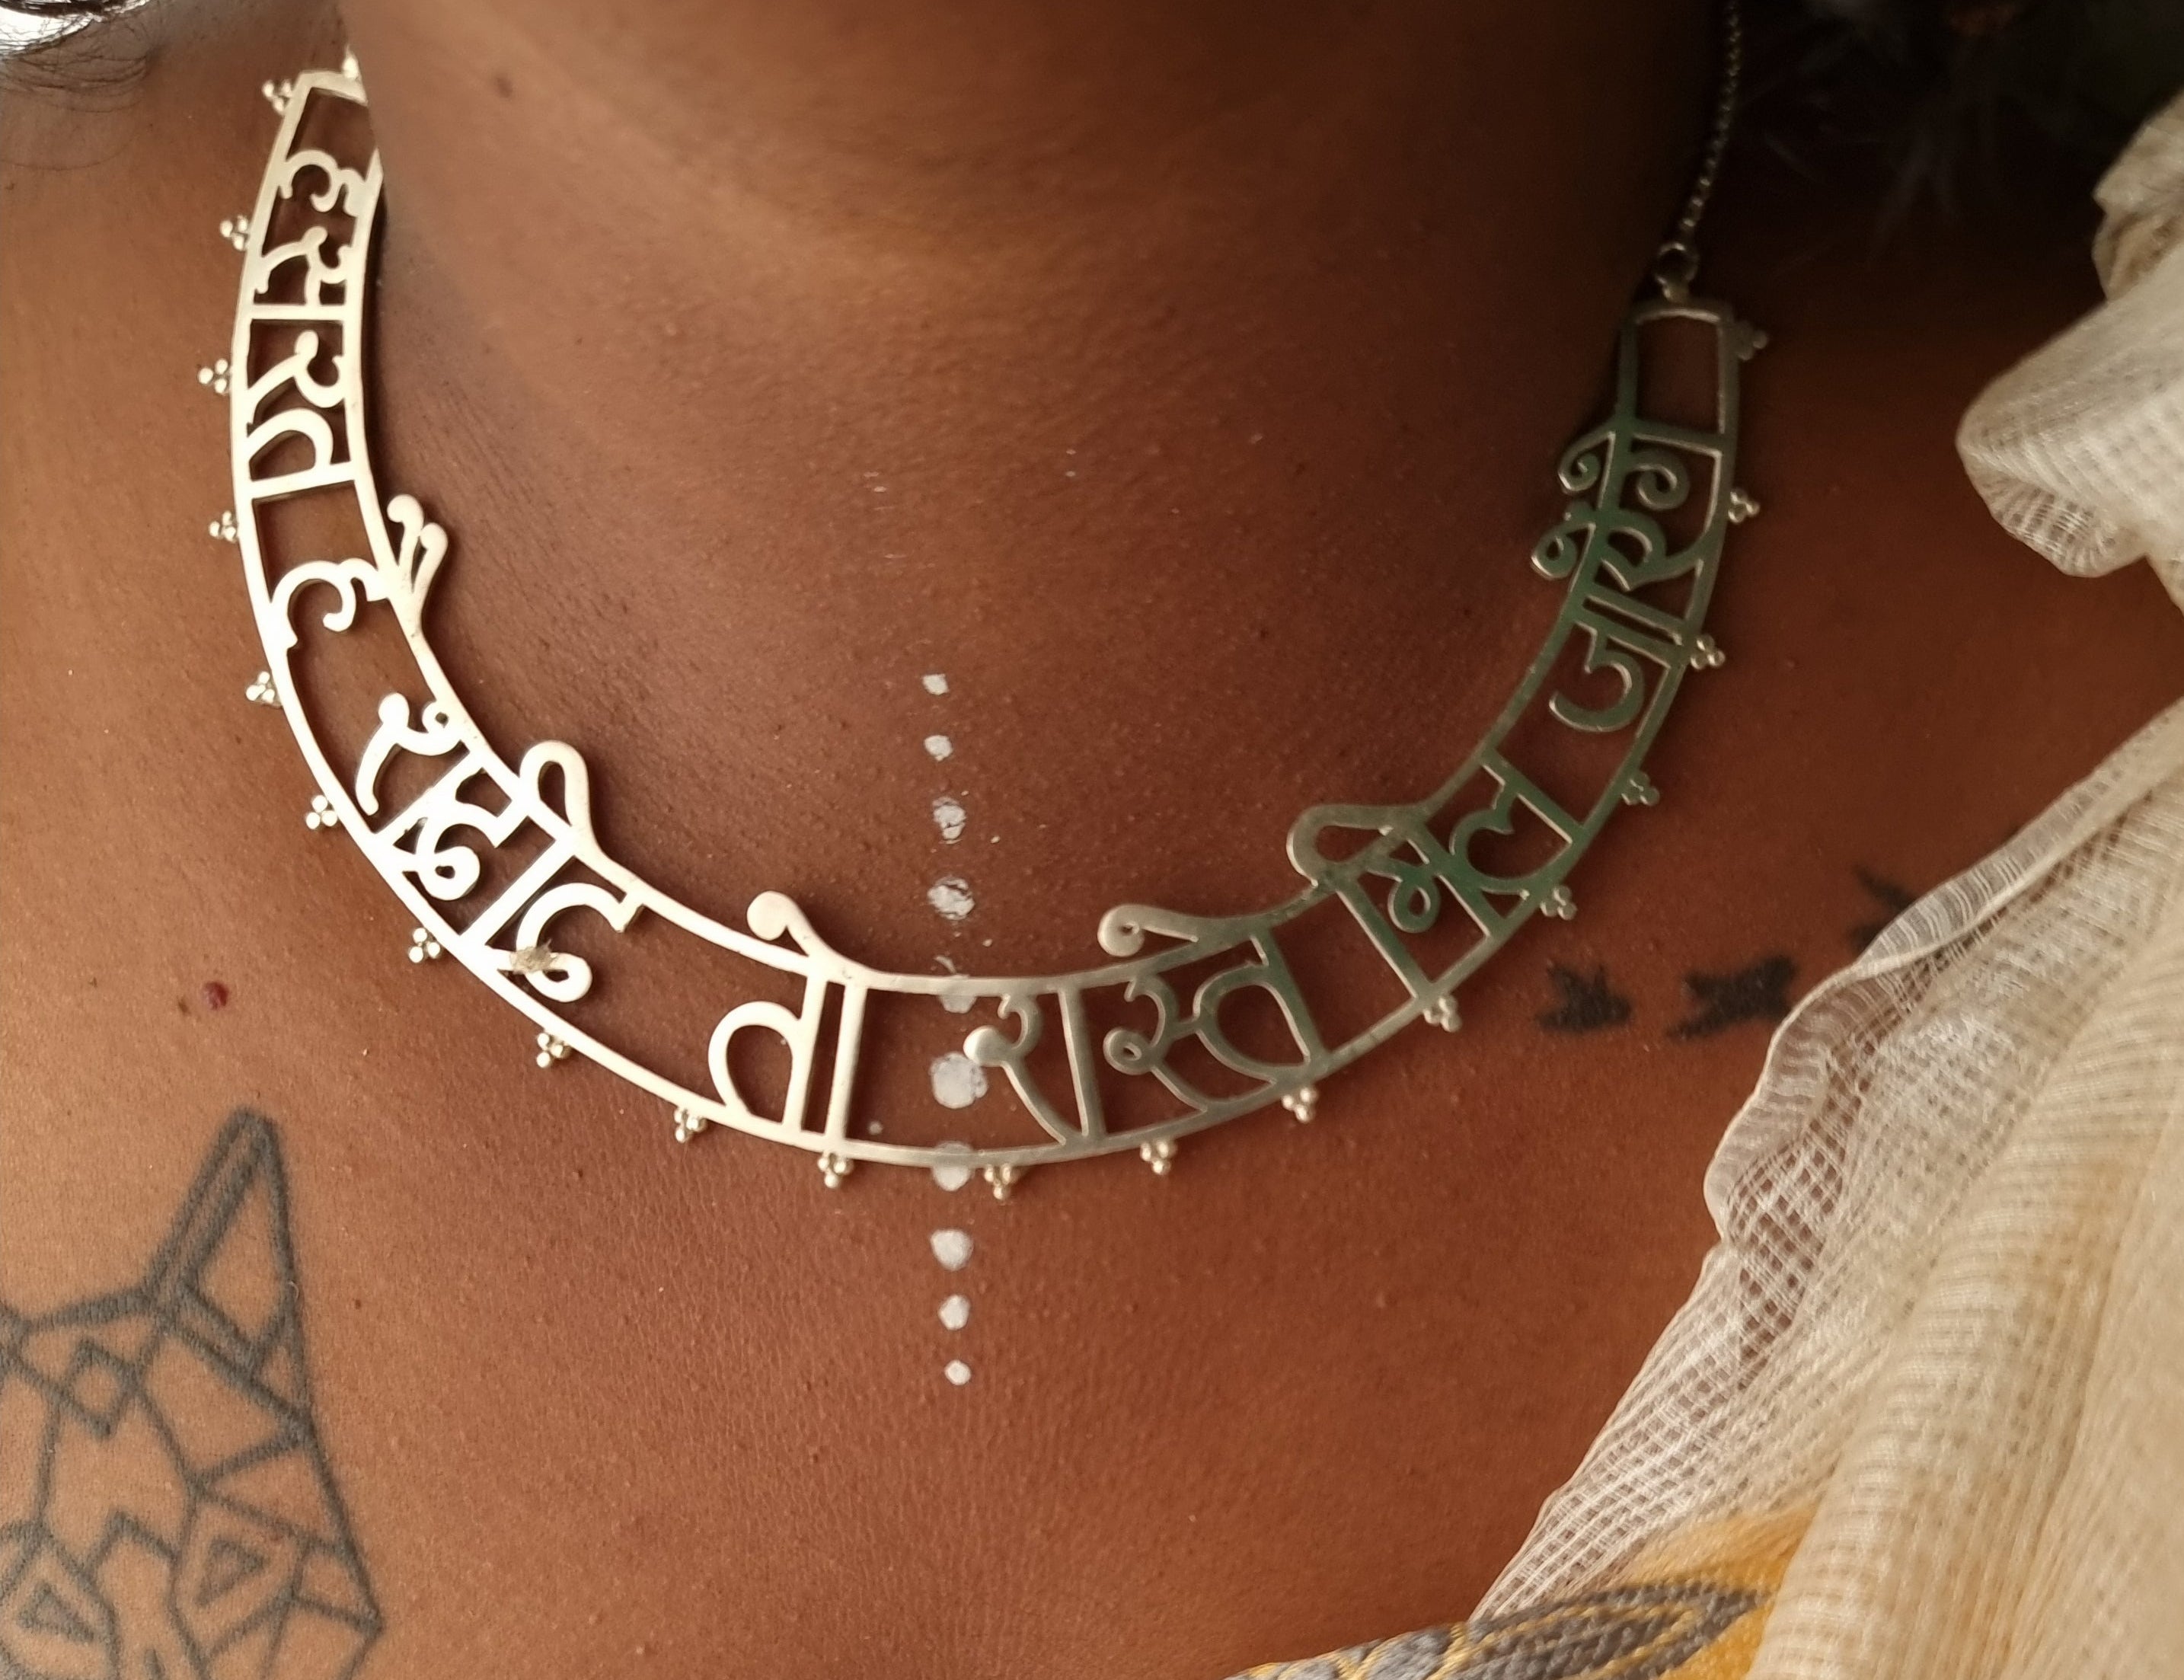 Dive into the world of poetic jewellery with Quirksmith's Hasrat Hai Shadeed Necklace, featured on Shark Tank India.